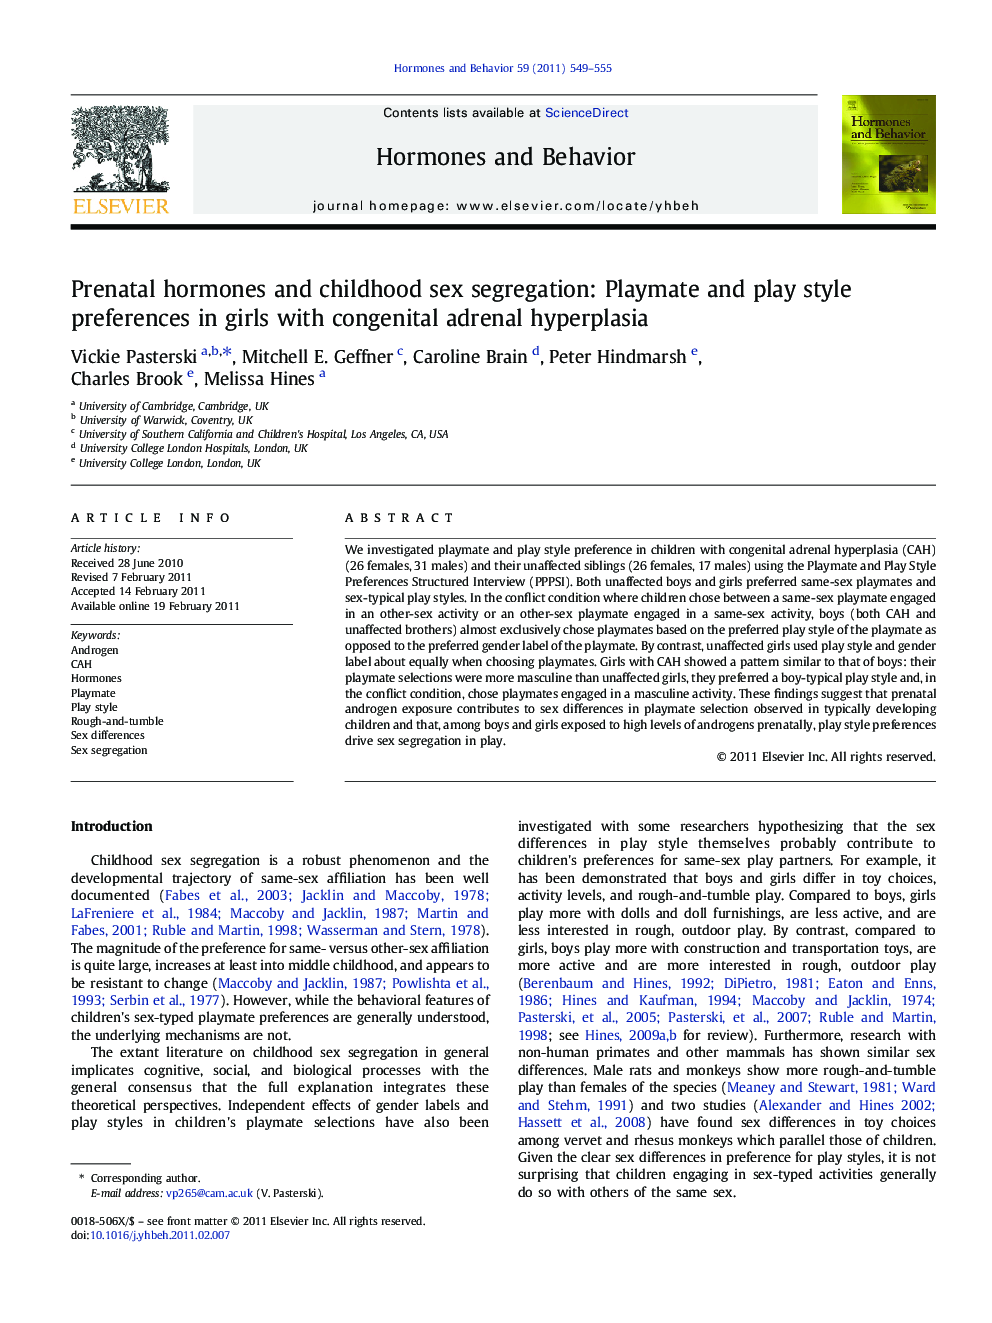 Prenatal hormones and childhood sex segregation: Playmate and play style preferences in girls with congenital adrenal hyperplasia